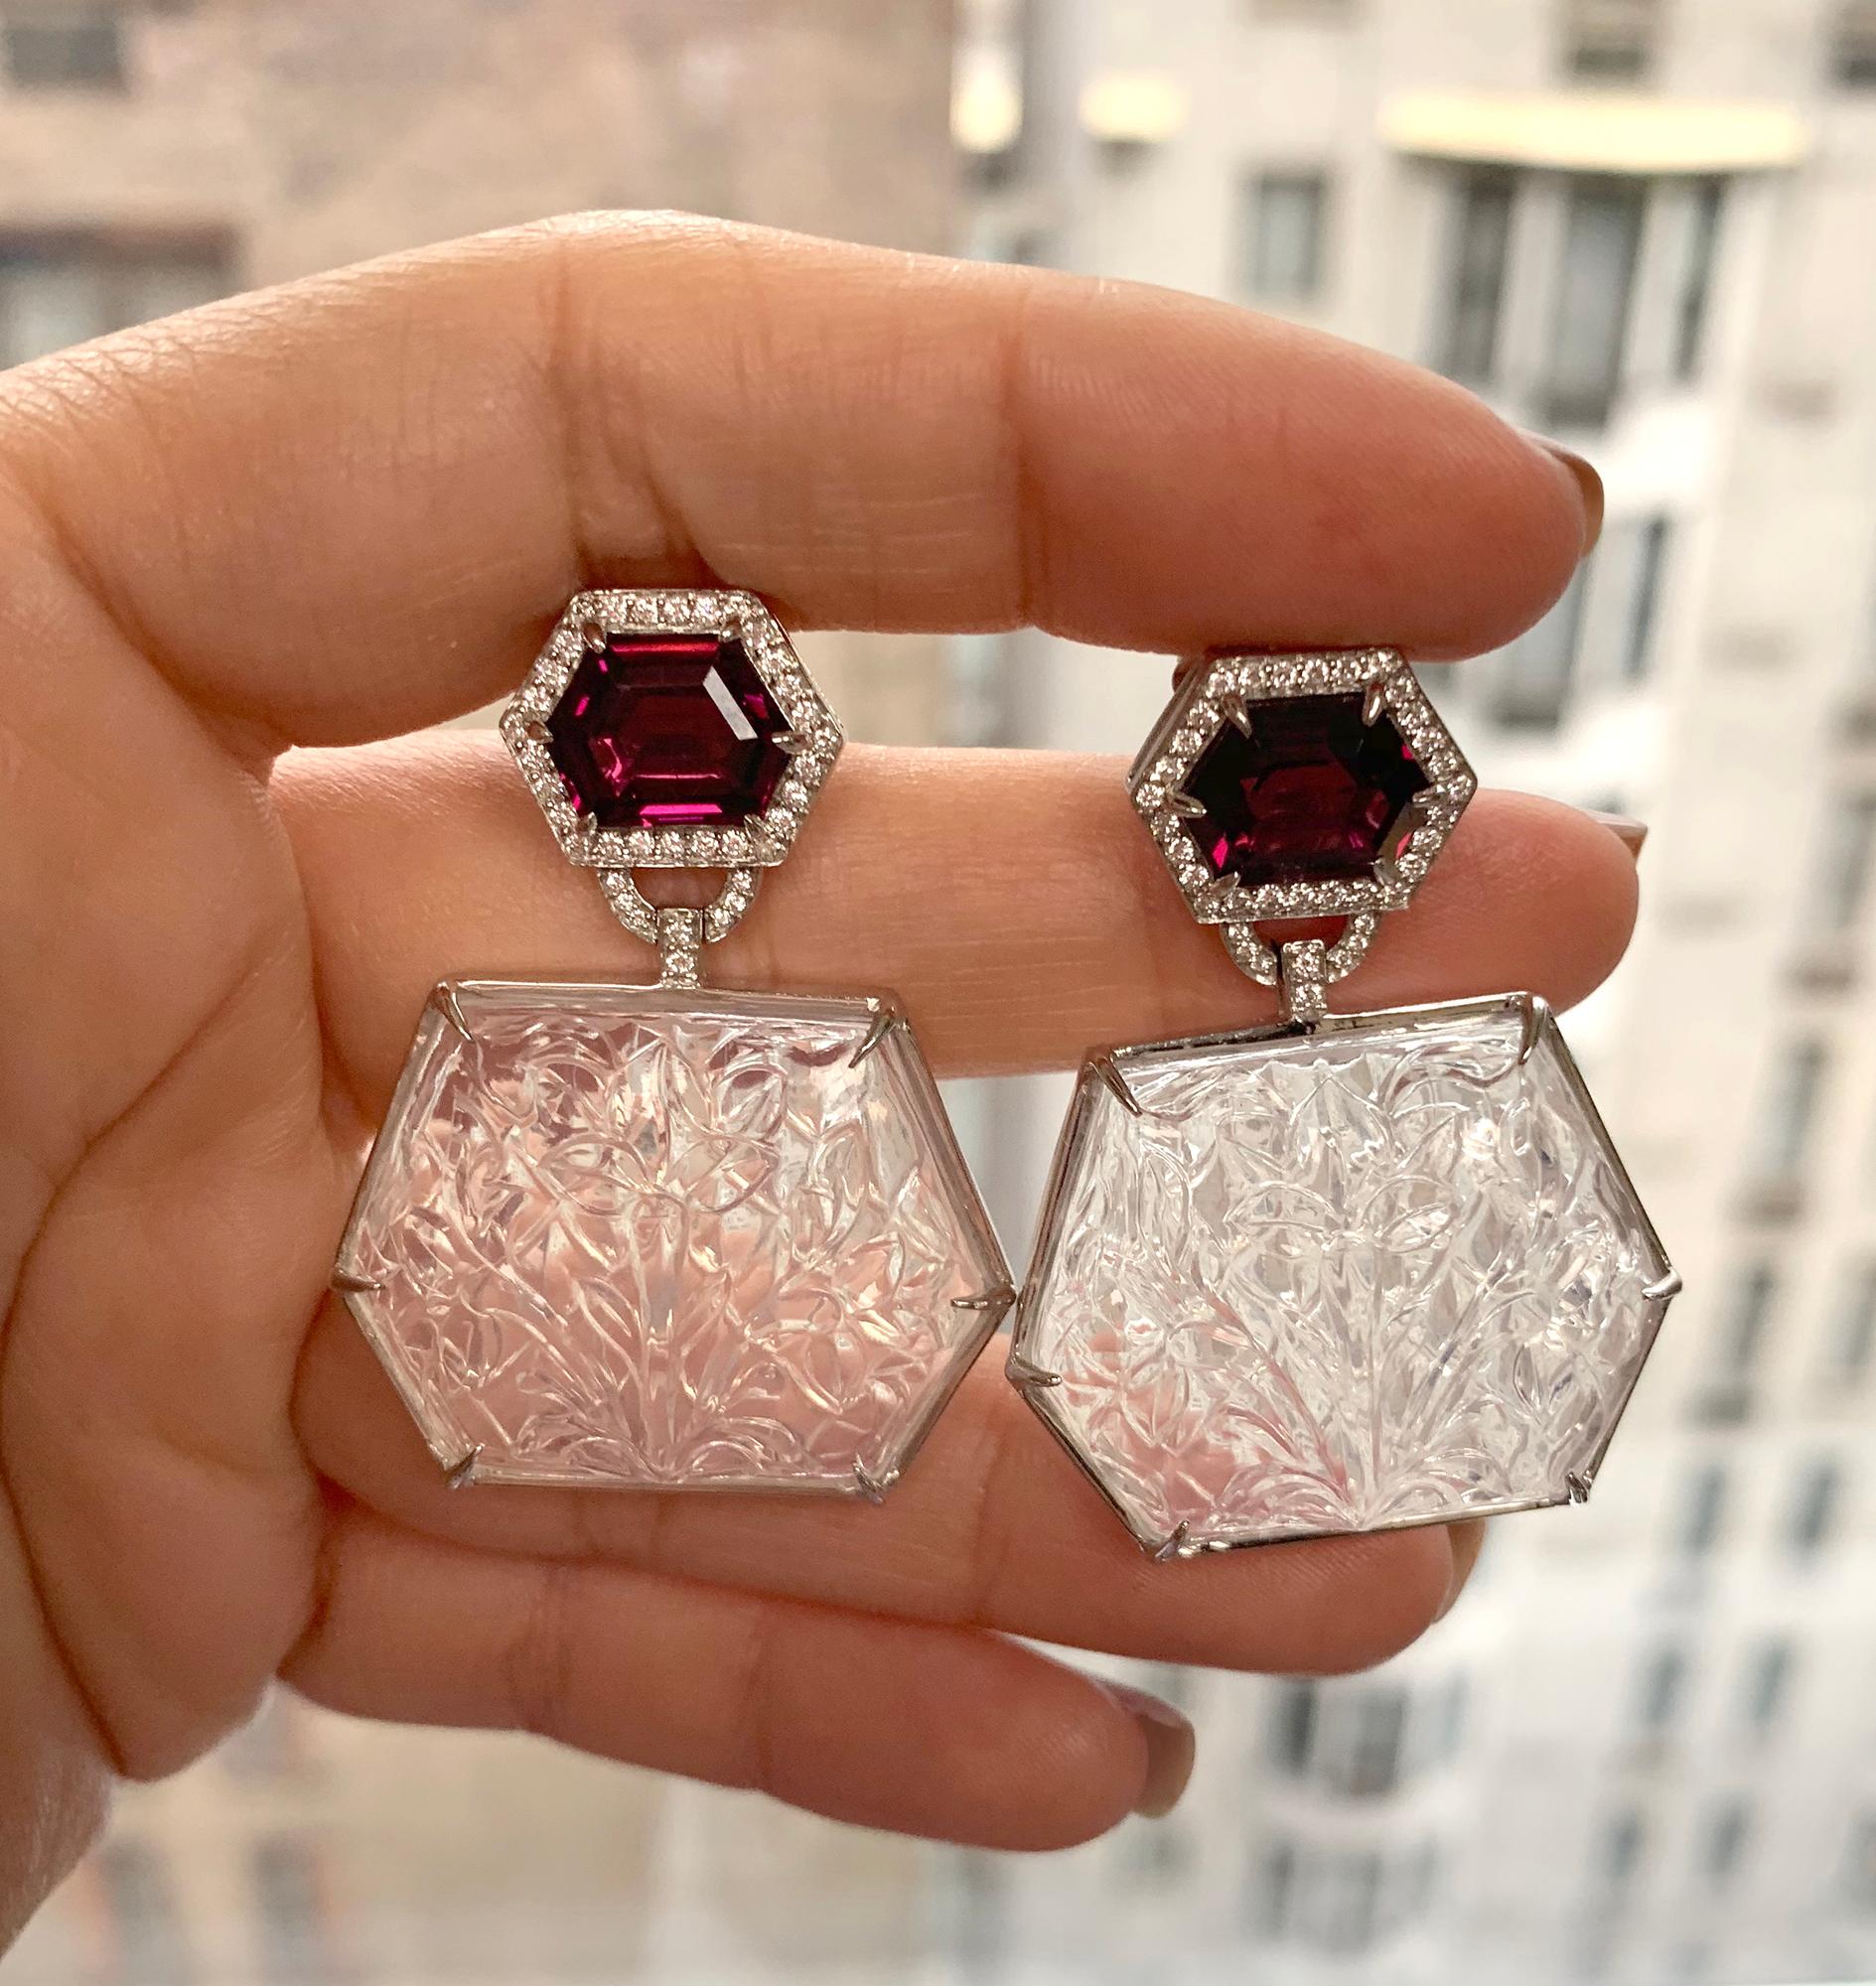 These Garnet Octagon with Moon Quartz Carved Earrings in 18K White Gold are a stunning piece from the 'G-One' Collection. These earrings feature beautifully carved moon quartz stones set in 18K white gold, which are then adorned with garnet octagon